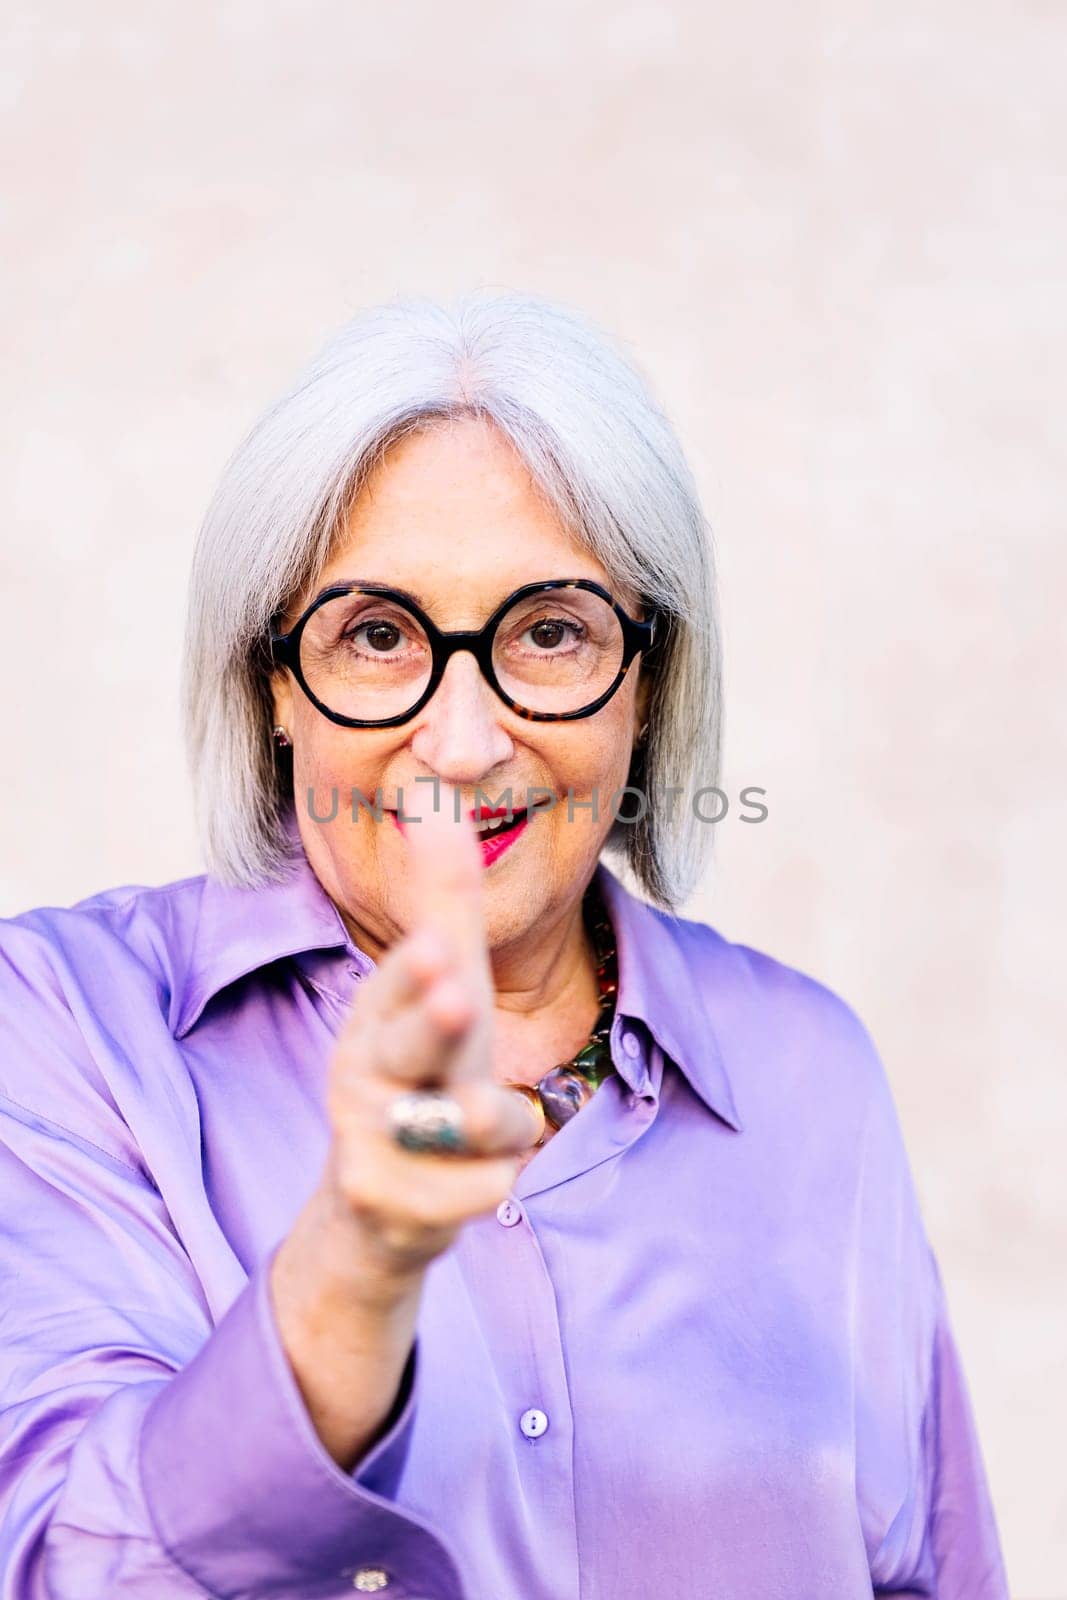 friendly senior woman looking at camera pointing with fingers like a gun, concept of happiness of elderly people and active lifestyle